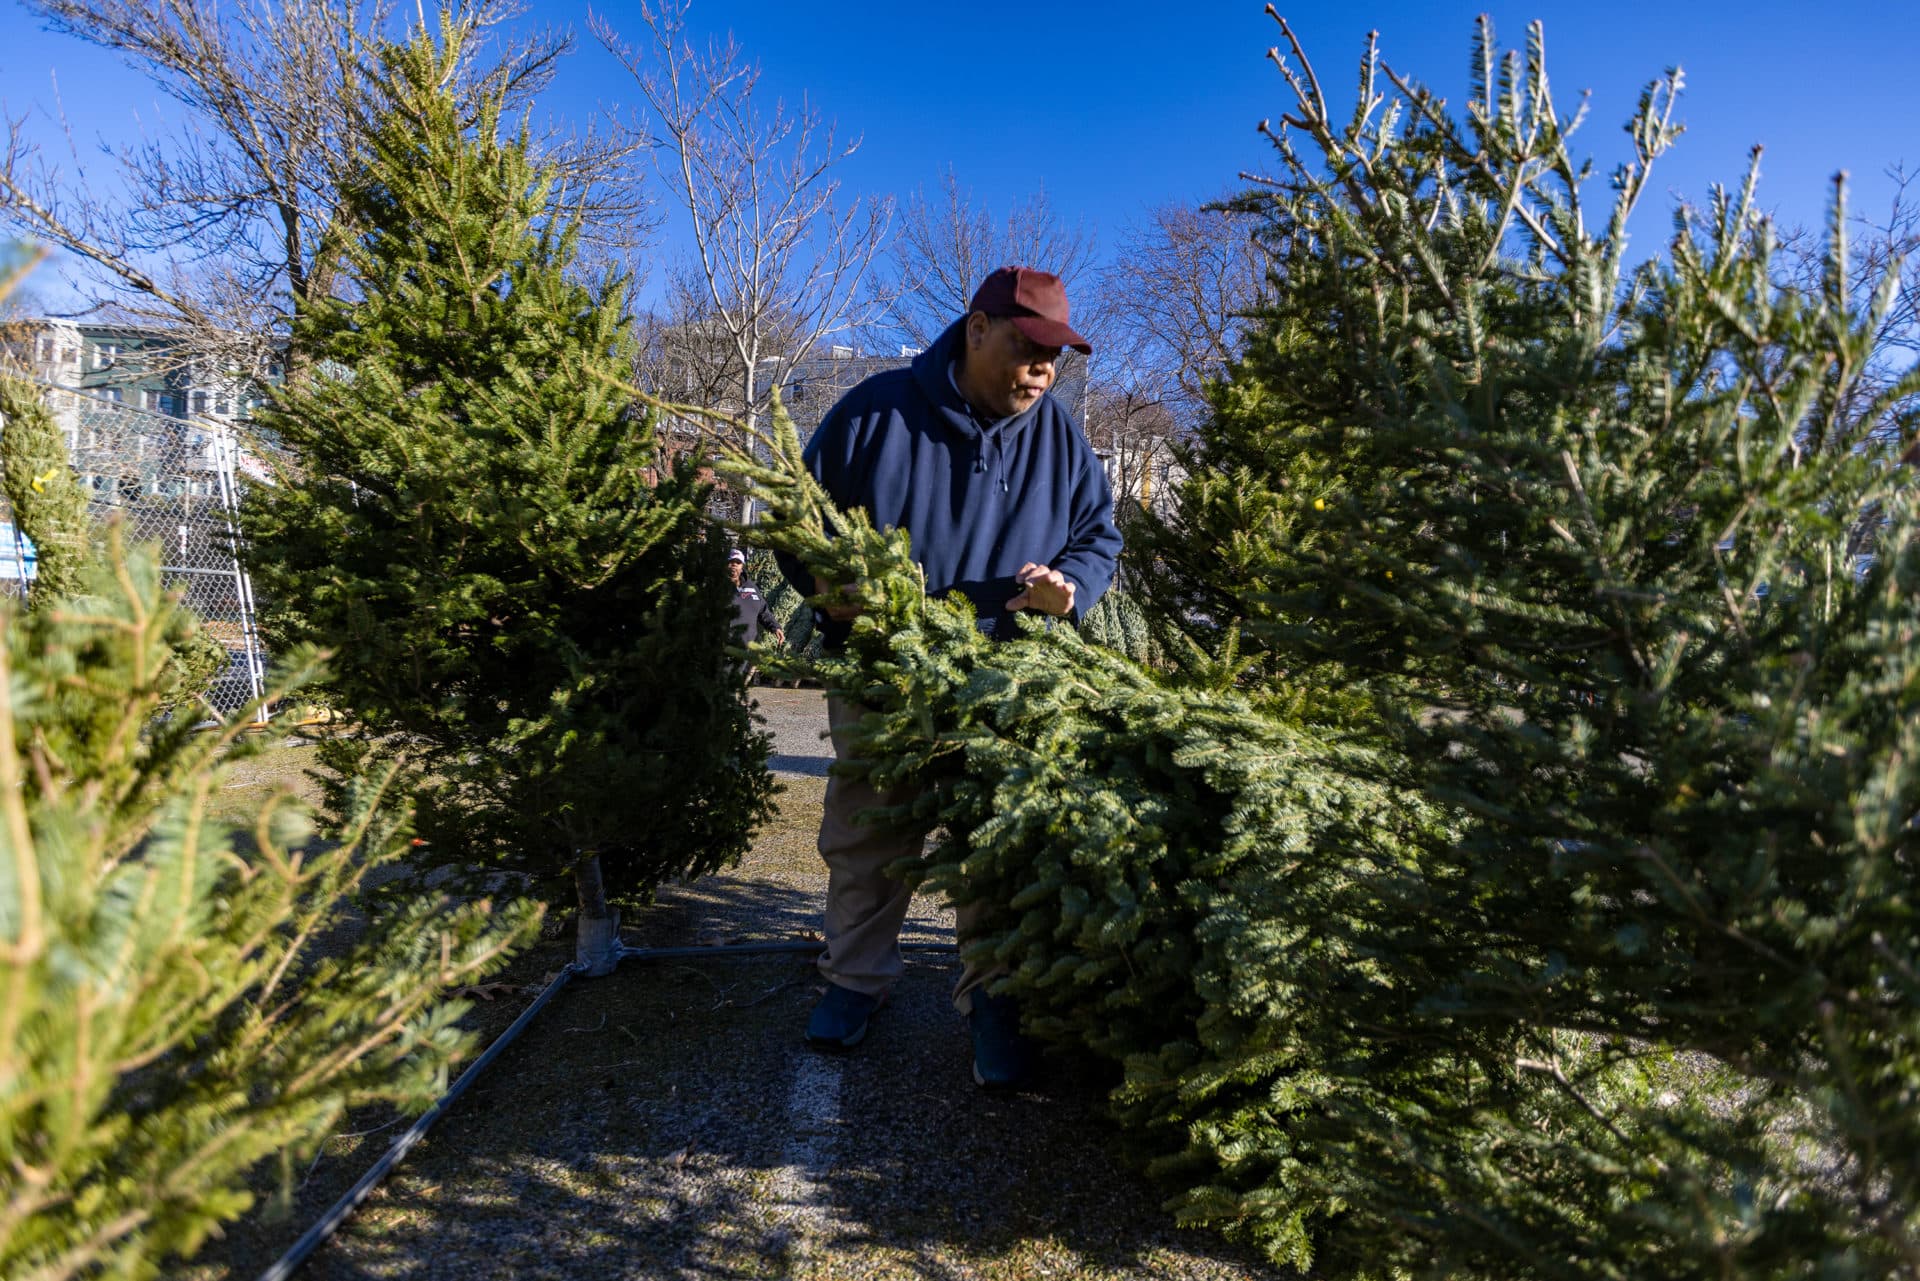 Dannie Kelly picks up a Christmas tree off the ground at his tree lot in Roxbury. (Jesse Costa/WBUR)